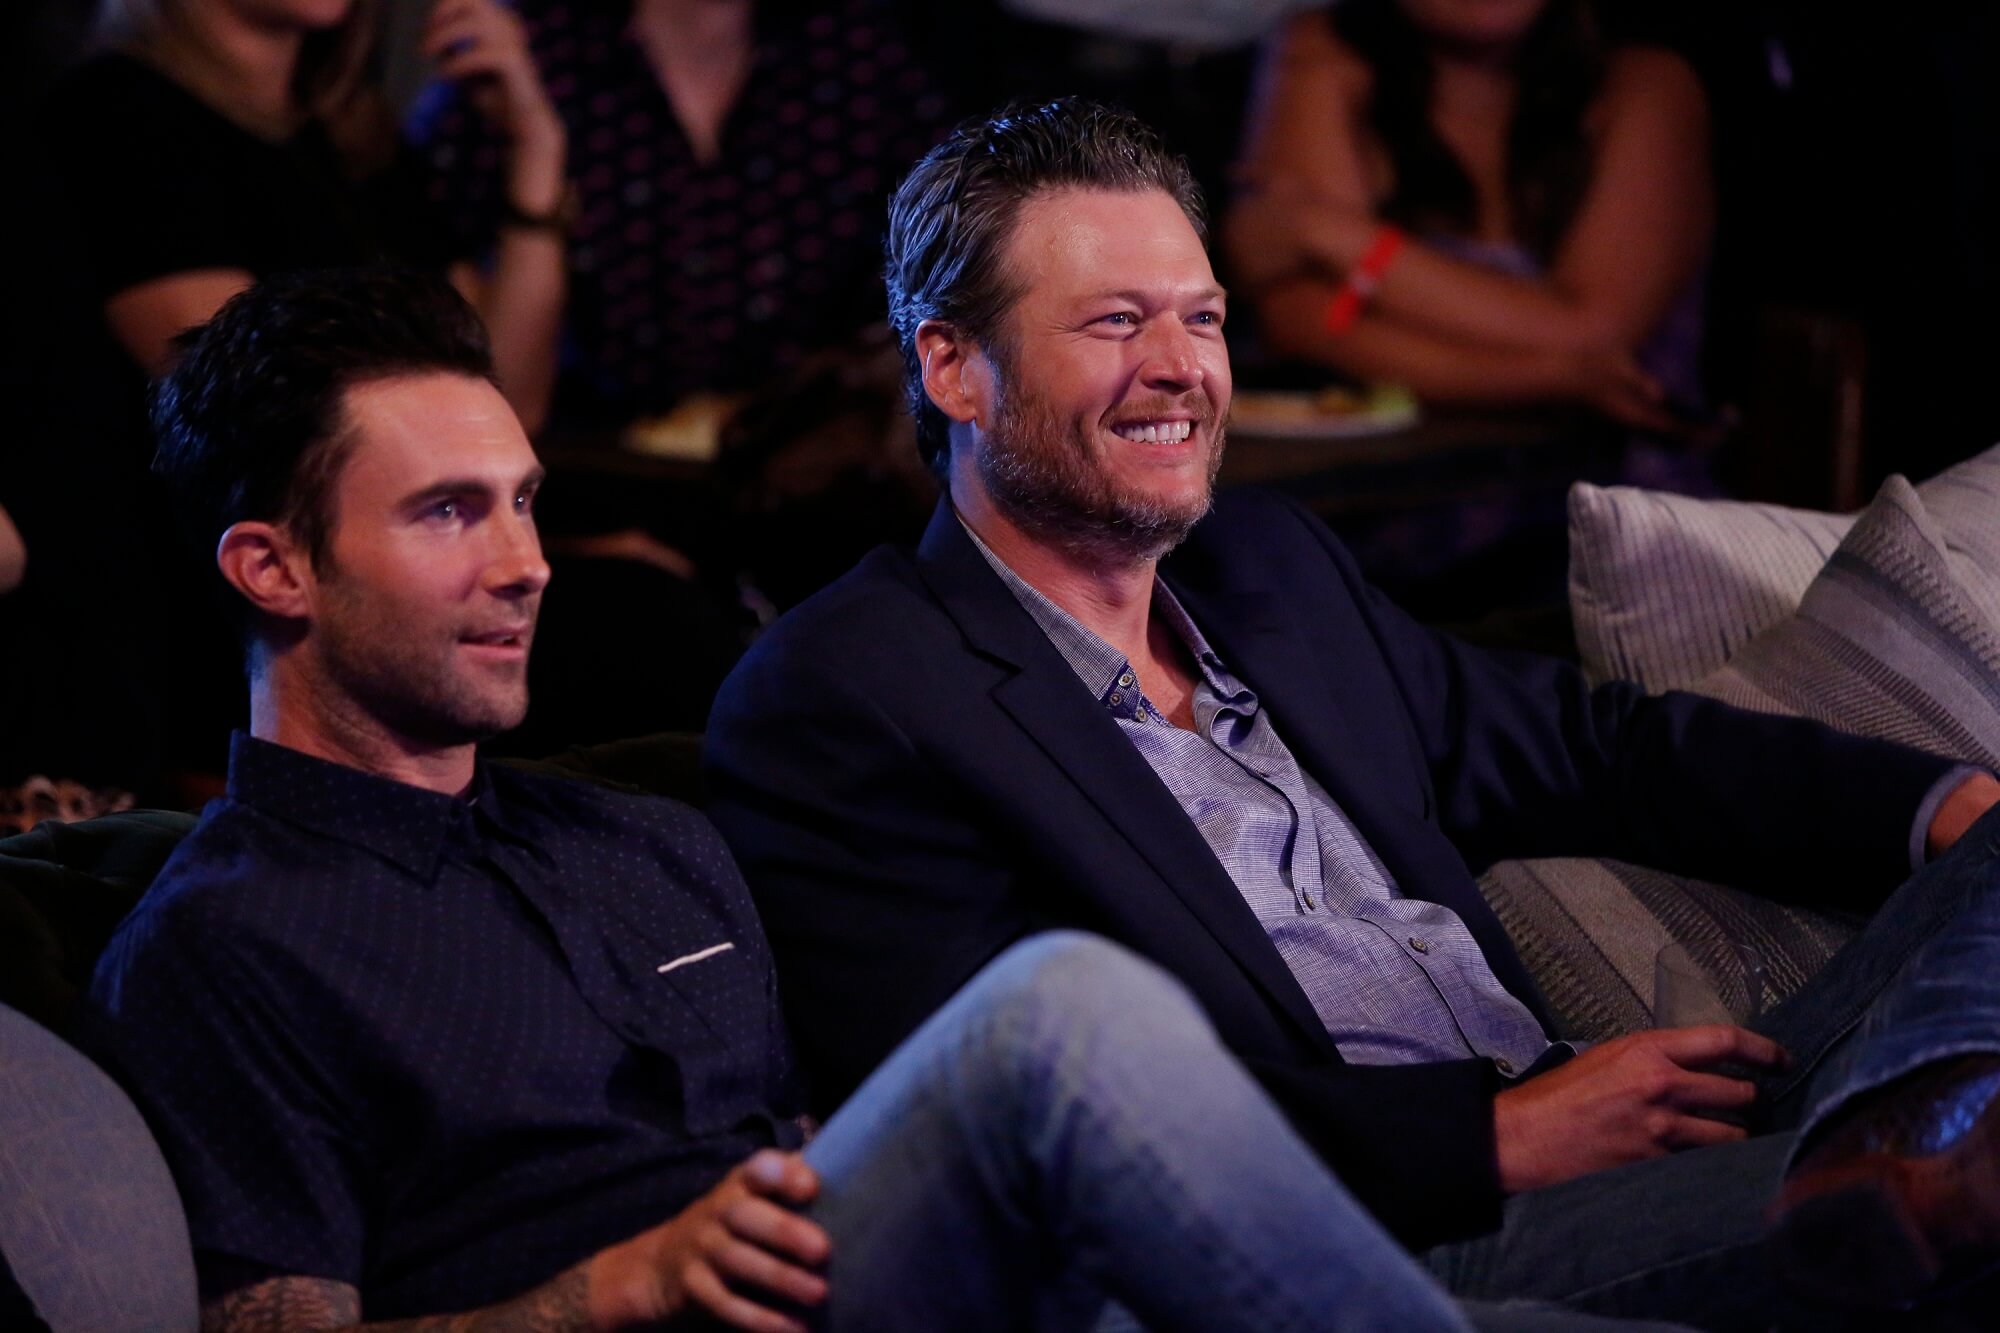 Adam Levine and Blake Shelton sit together side by side